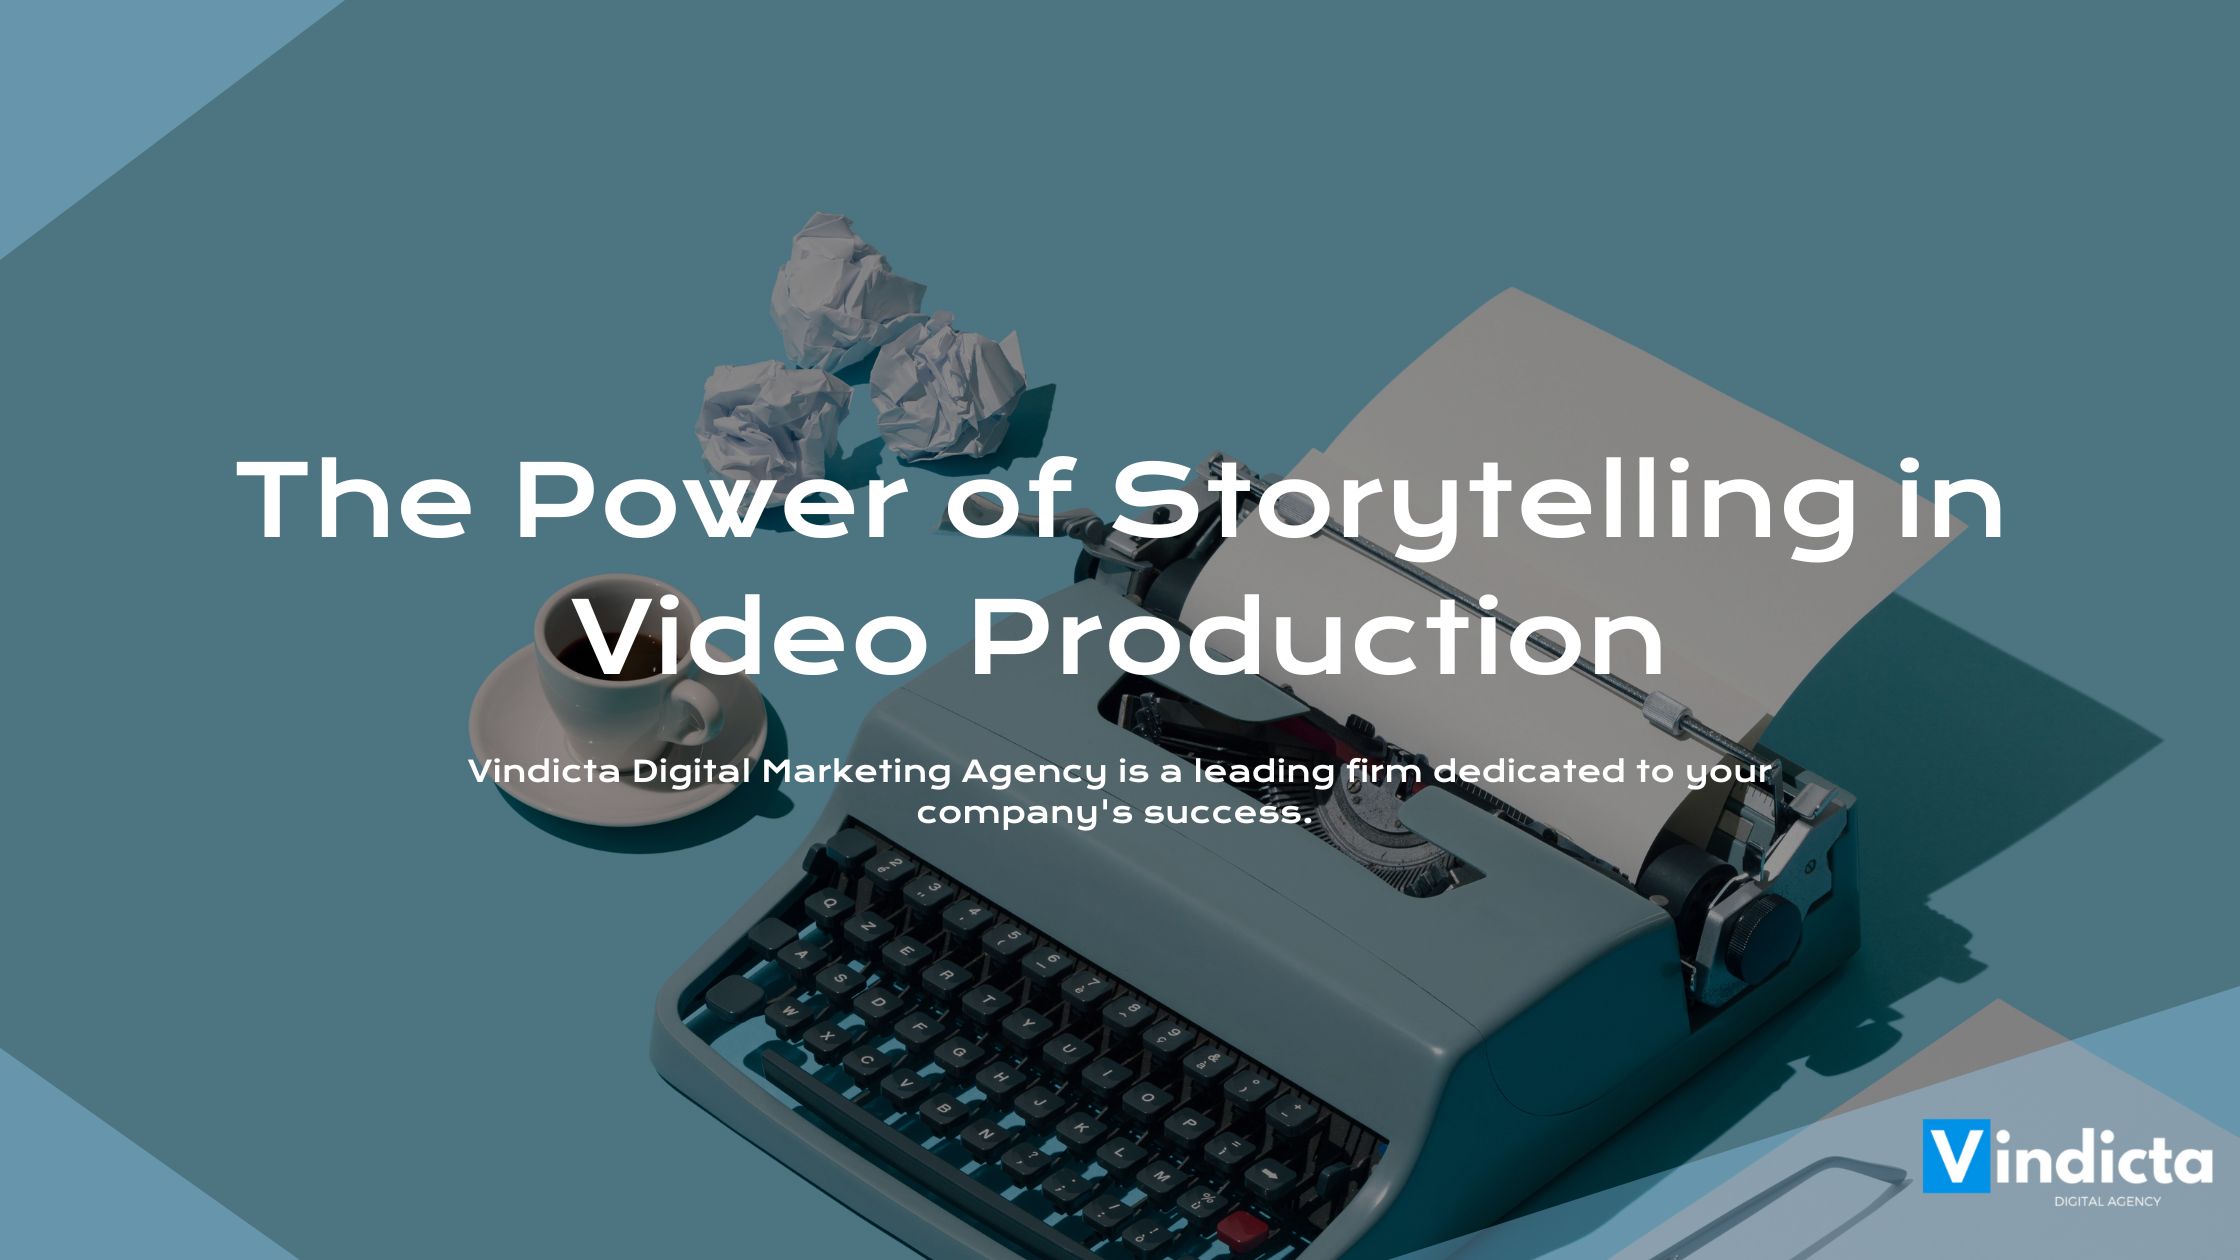 The Power of Storytelling in Video Production